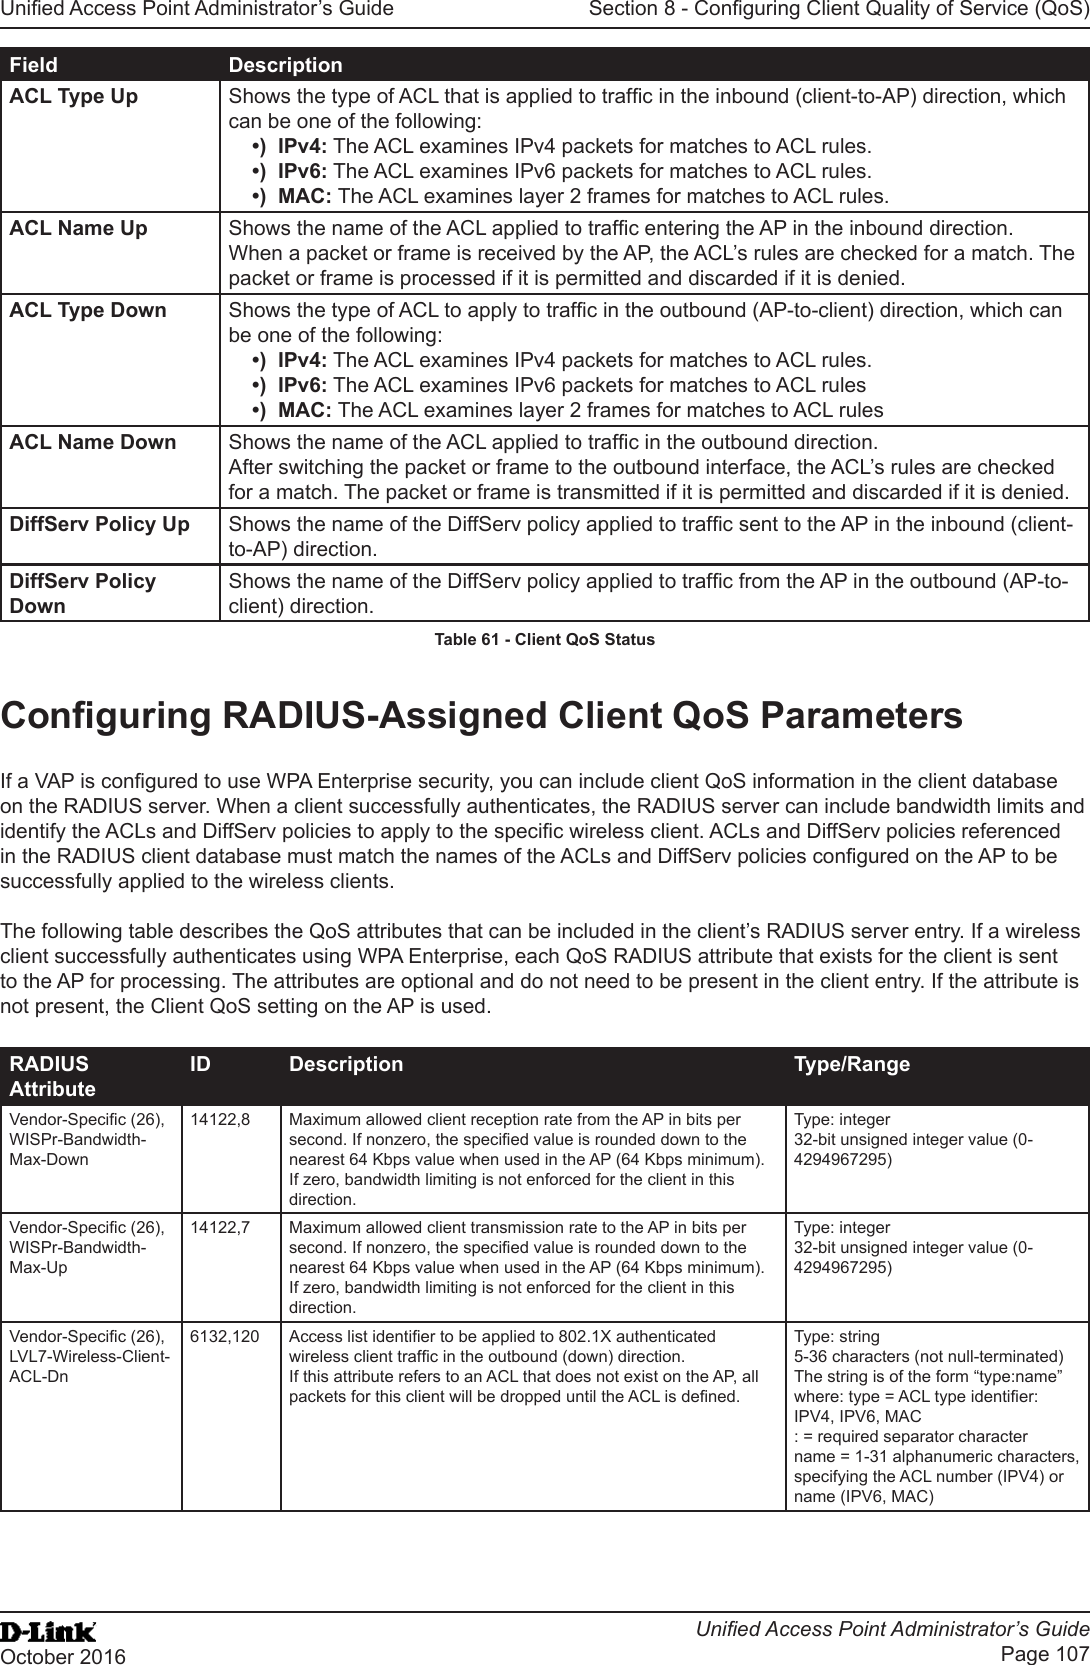 Unied Access Point Administrator’s GuideUnied Access Point Administrator’s GuidePage 107October 2016Section 8 - Conguring Client Quality of Service (QoS)Field DescriptionACL Type Up Shows the type of ACL that is applied to trafc in the inbound (client-to-AP) direction, which can be one of the following: •)  IPv4: The ACL examines IPv4 packets for matches to ACL rules.•)  IPv6: The ACL examines IPv6 packets for matches to ACL rules.•)  MAC: The ACL examines layer 2 frames for matches to ACL rules.ACL Name Up Shows the name of the ACL applied to trafc entering the AP in the inbound direction. When a packet or frame is received by the AP, the ACL’s rules are checked for a match. The packet or frame is processed if it is permitted and discarded if it is denied.ACL Type Down Shows the type of ACL to apply to trafc in the outbound (AP-to-client) direction, which can be one of the following: •)  IPv4: The ACL examines IPv4 packets for matches to ACL rules.•)  IPv6: The ACL examines IPv6 packets for matches to ACL rules•)  MAC: The ACL examines layer 2 frames for matches to ACL rulesACL Name Down Shows the name of the ACL applied to trafc in the outbound direction. After switching the packet or frame to the outbound interface, the ACL’s rules are checked for a match. The packet or frame is transmitted if it is permitted and discarded if it is denied.DiffServ Policy Up Shows the name of the DiffServ policy applied to trafc sent to the AP in the inbound (client-to-AP) direction.DiffServ Policy DownShows the name of the DiffServ policy applied to trafc from the AP in the outbound (AP-to-client) direction.Table 61 - Client QoS StatusConguring RADIUS-Assigned Client QoS ParametersIf a VAP is congured to use WPA Enterprise security, you can include client QoS information in the client database on the RADIUS server. When a client successfully authenticates, the RADIUS server can include bandwidth limits and identify the ACLs and DiffServ policies to apply to the specic wireless client. ACLs and DiffServ policies referenced in the RADIUS client database must match the names of the ACLs and DiffServ policies congured on the AP to be successfully applied to the wireless clients.The following table describes the QoS attributes that can be included in the client’s RADIUS server entry. If a wireless client successfully authenticates using WPA Enterprise, each QoS RADIUS attribute that exists for the client is sent to the AP for processing. The attributes are optional and do not need to be present in the client entry. If the attribute is not present, the Client QoS setting on the AP is used.RADIUS AttributeID Description Type/RangeVendor-Specic (26), WISPr-Bandwidth-Max-Down14122,8 Maximum allowed client reception rate from the AP in bits per second. If nonzero, the specied value is rounded down to the nearest 64 Kbps value when used in the AP (64 Kbps minimum). If zero, bandwidth limiting is not enforced for the client in this direction.Type: integer32-bit unsigned integer value (0-4294967295)Vendor-Specic (26), WISPr-Bandwidth-Max-Up14122,7 Maximum allowed client transmission rate to the AP in bits per second. If nonzero, the specied value is rounded down to the nearest 64 Kbps value when used in the AP (64 Kbps minimum). If zero, bandwidth limiting is not enforced for the client in this direction.Type: integer32-bit unsigned integer value (0-4294967295)Vendor-Specic (26), LVL7-Wireless-Client-ACL-Dn6132,120 Access list identier to be applied to 802.1X authenticated wireless client trafc in the outbound (down) direction.If this attribute refers to an ACL that does not exist on the AP, all packets for this client will be dropped until the ACL is dened.Type: string5-36 characters (not null-terminated)The string is of the form “type:name” where: type = ACL type identier: IPV4, IPV6, MAC: = required separator charactername = 1-31 alphanumeric characters, specifying the ACL number (IPV4) or name (IPV6, MAC)